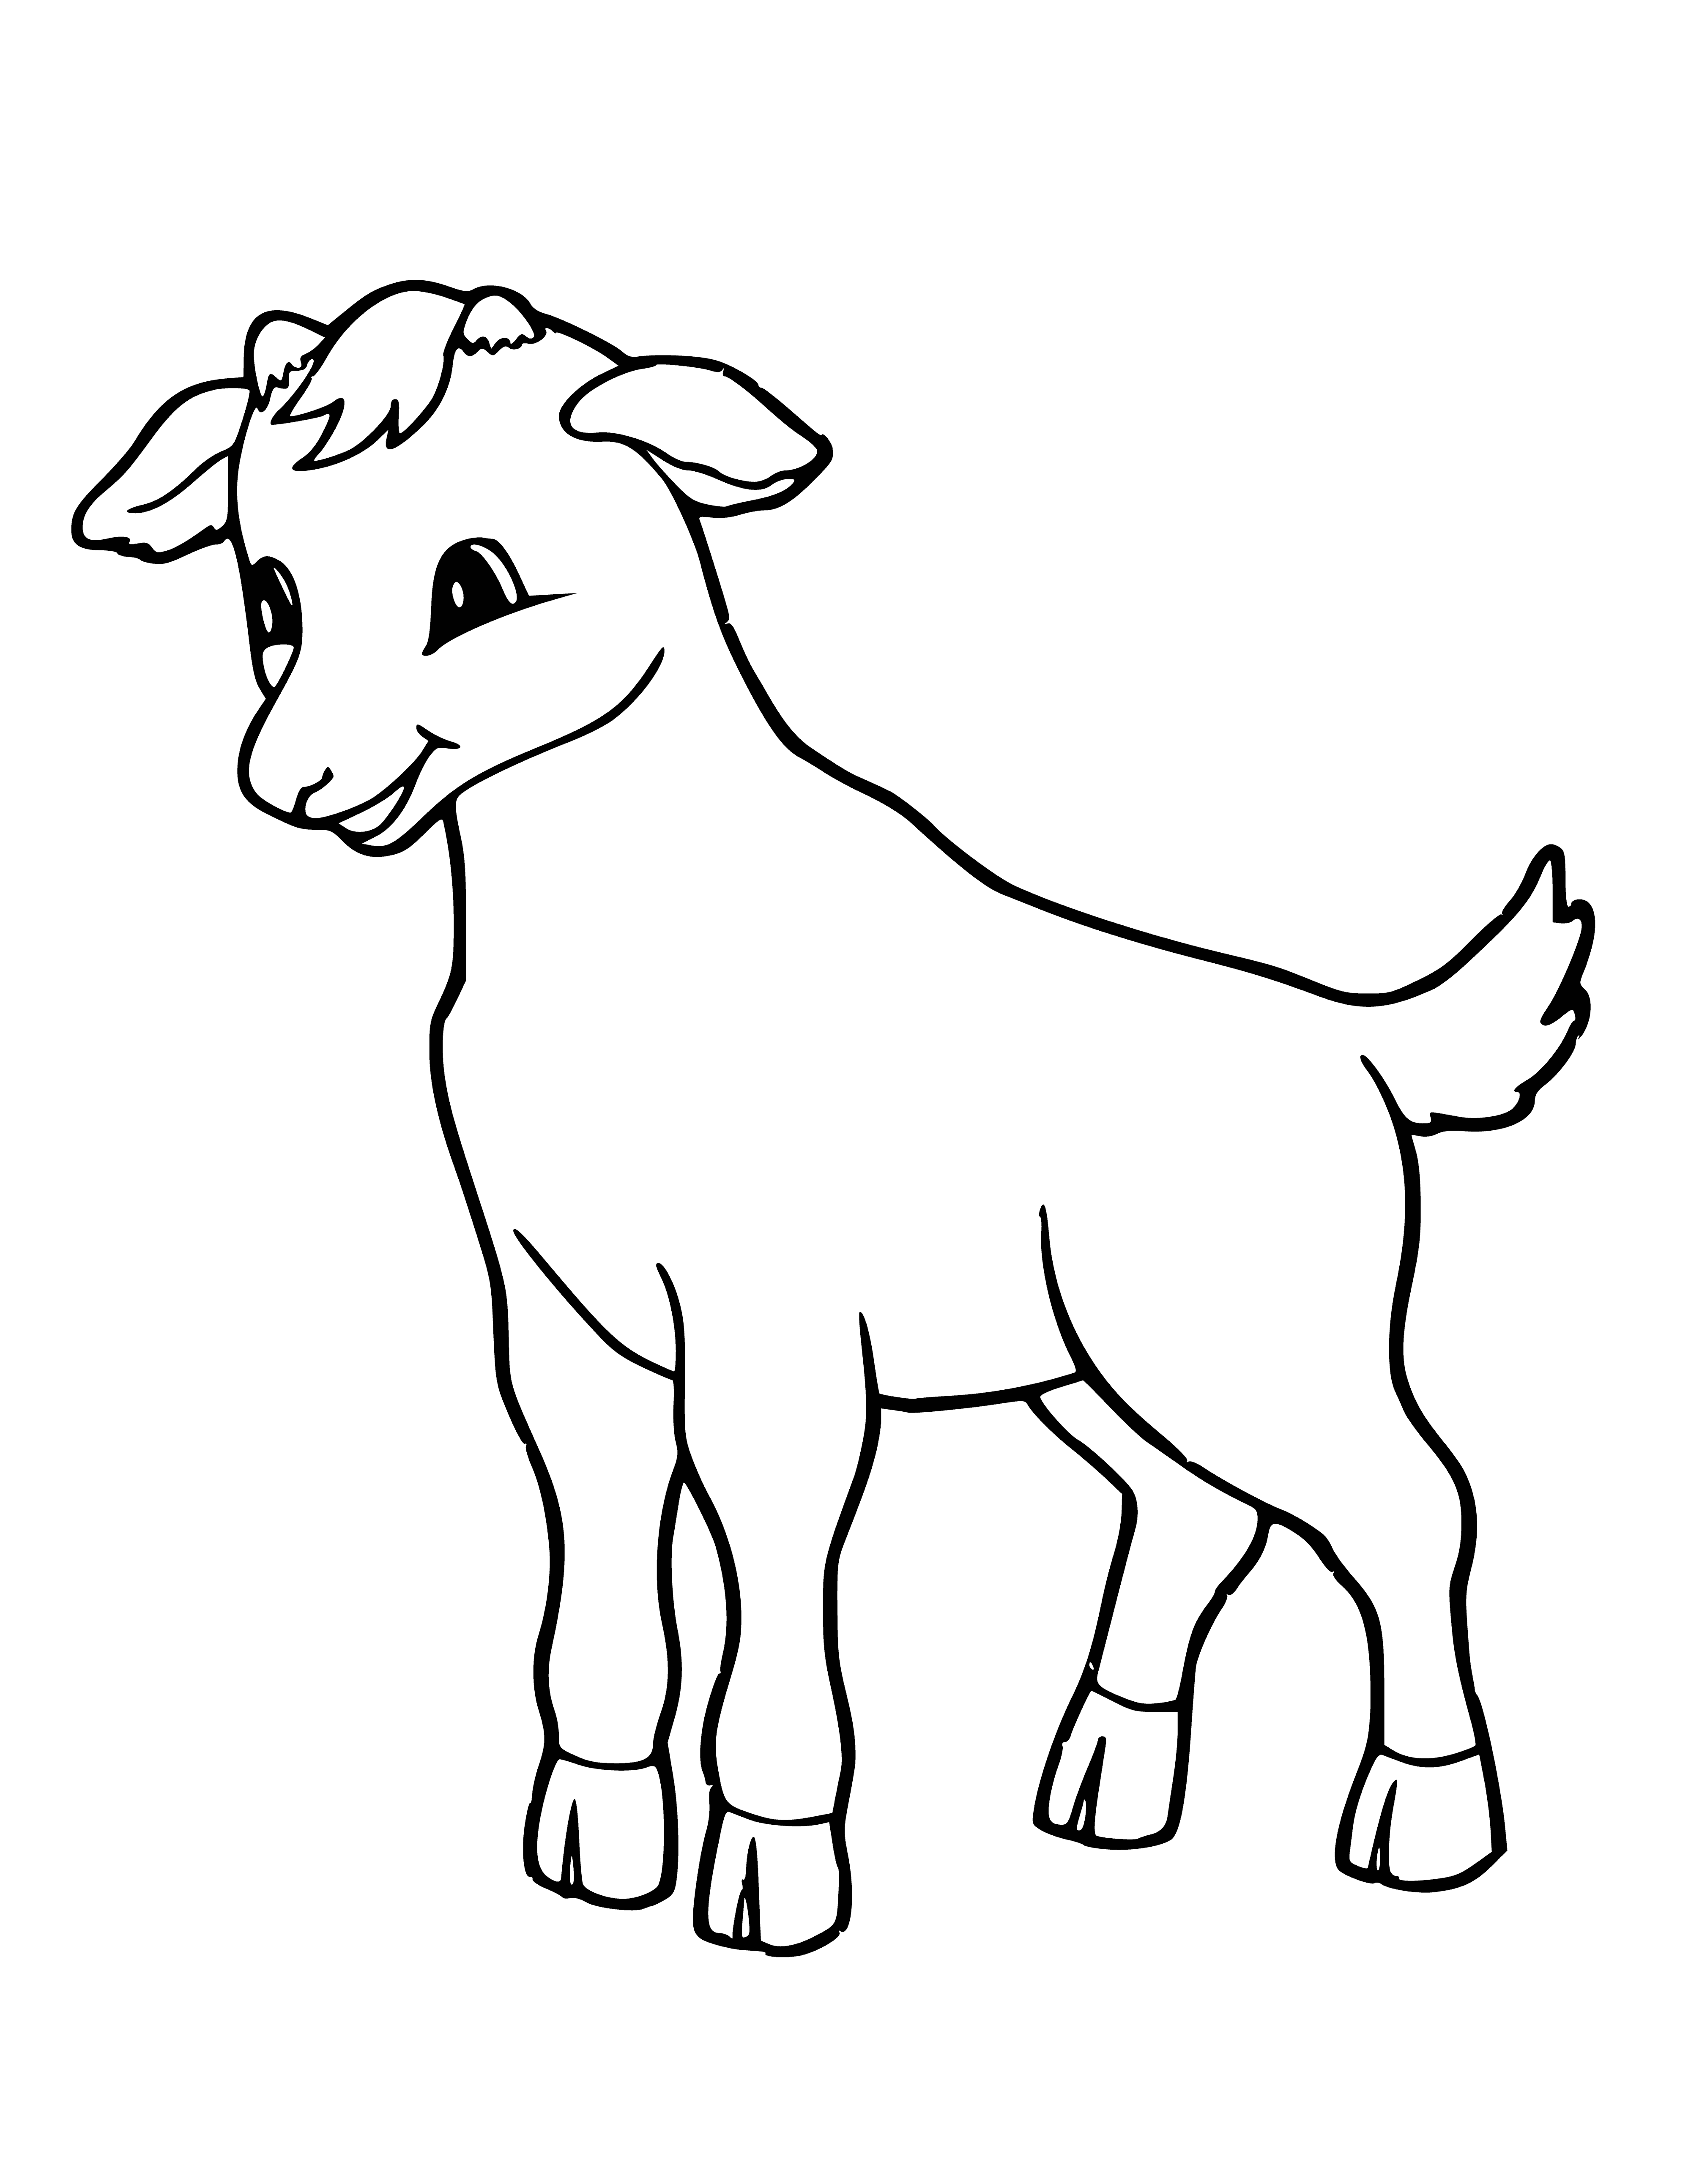 Little kid coloring page